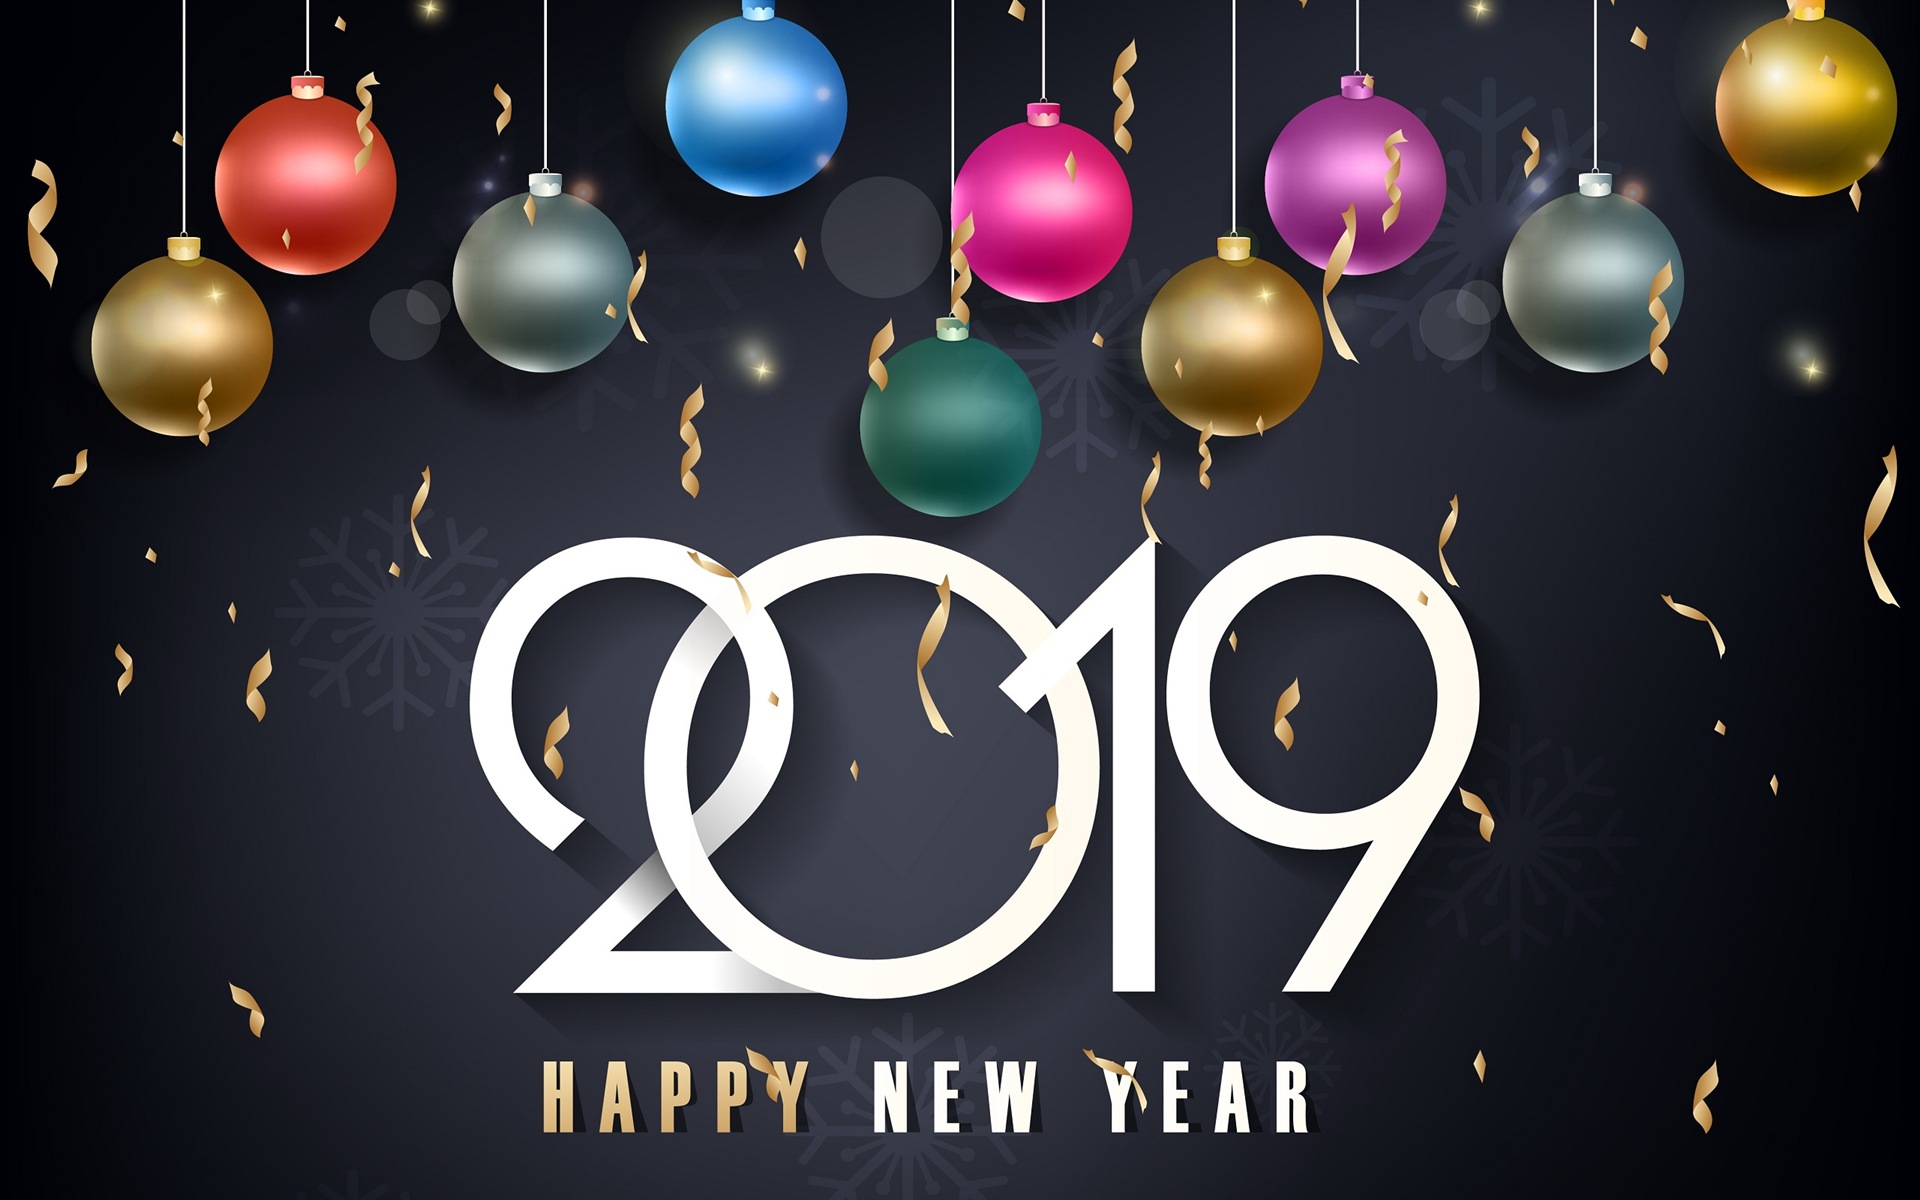 Happy New Year 2019 HD wallpapers #9 - 1920x1200